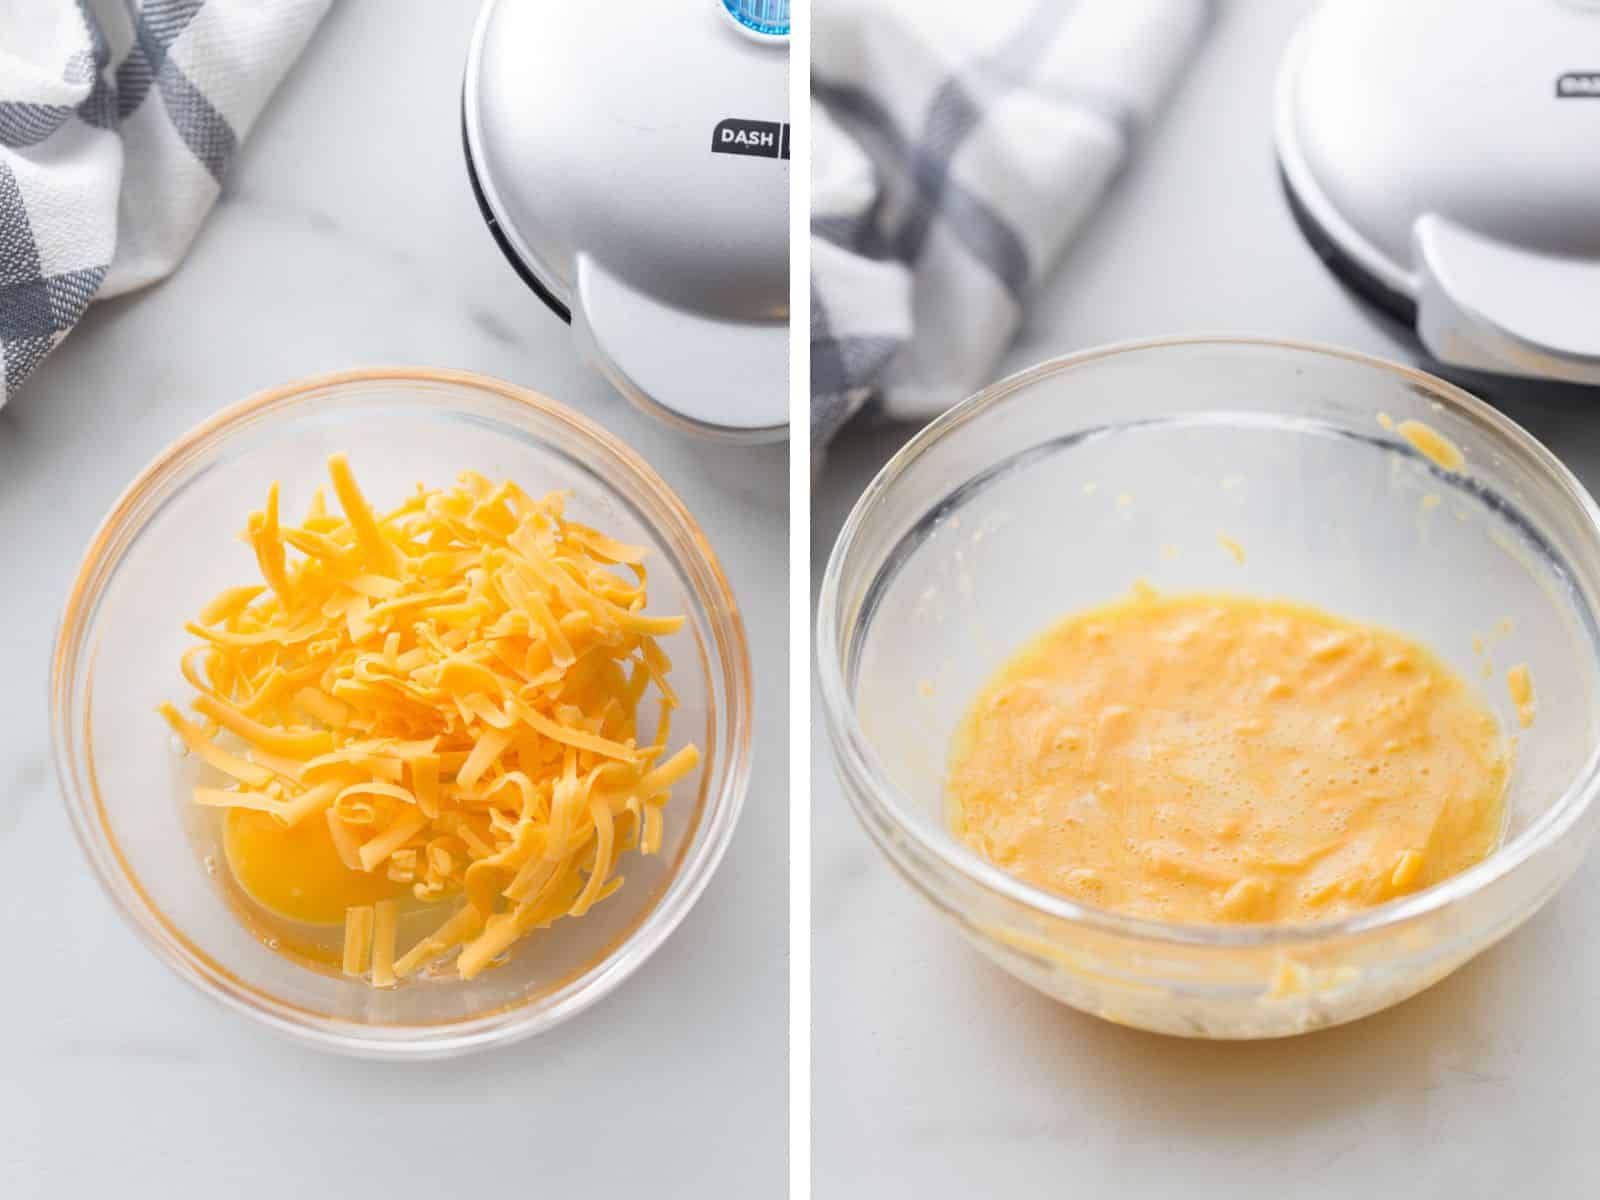 Side by side images of unmixed and mixed chaffle batter ingredients including eggs, shredded cheddar cheese, dash mini waffle maker, linen napkin in bowl ready to cook